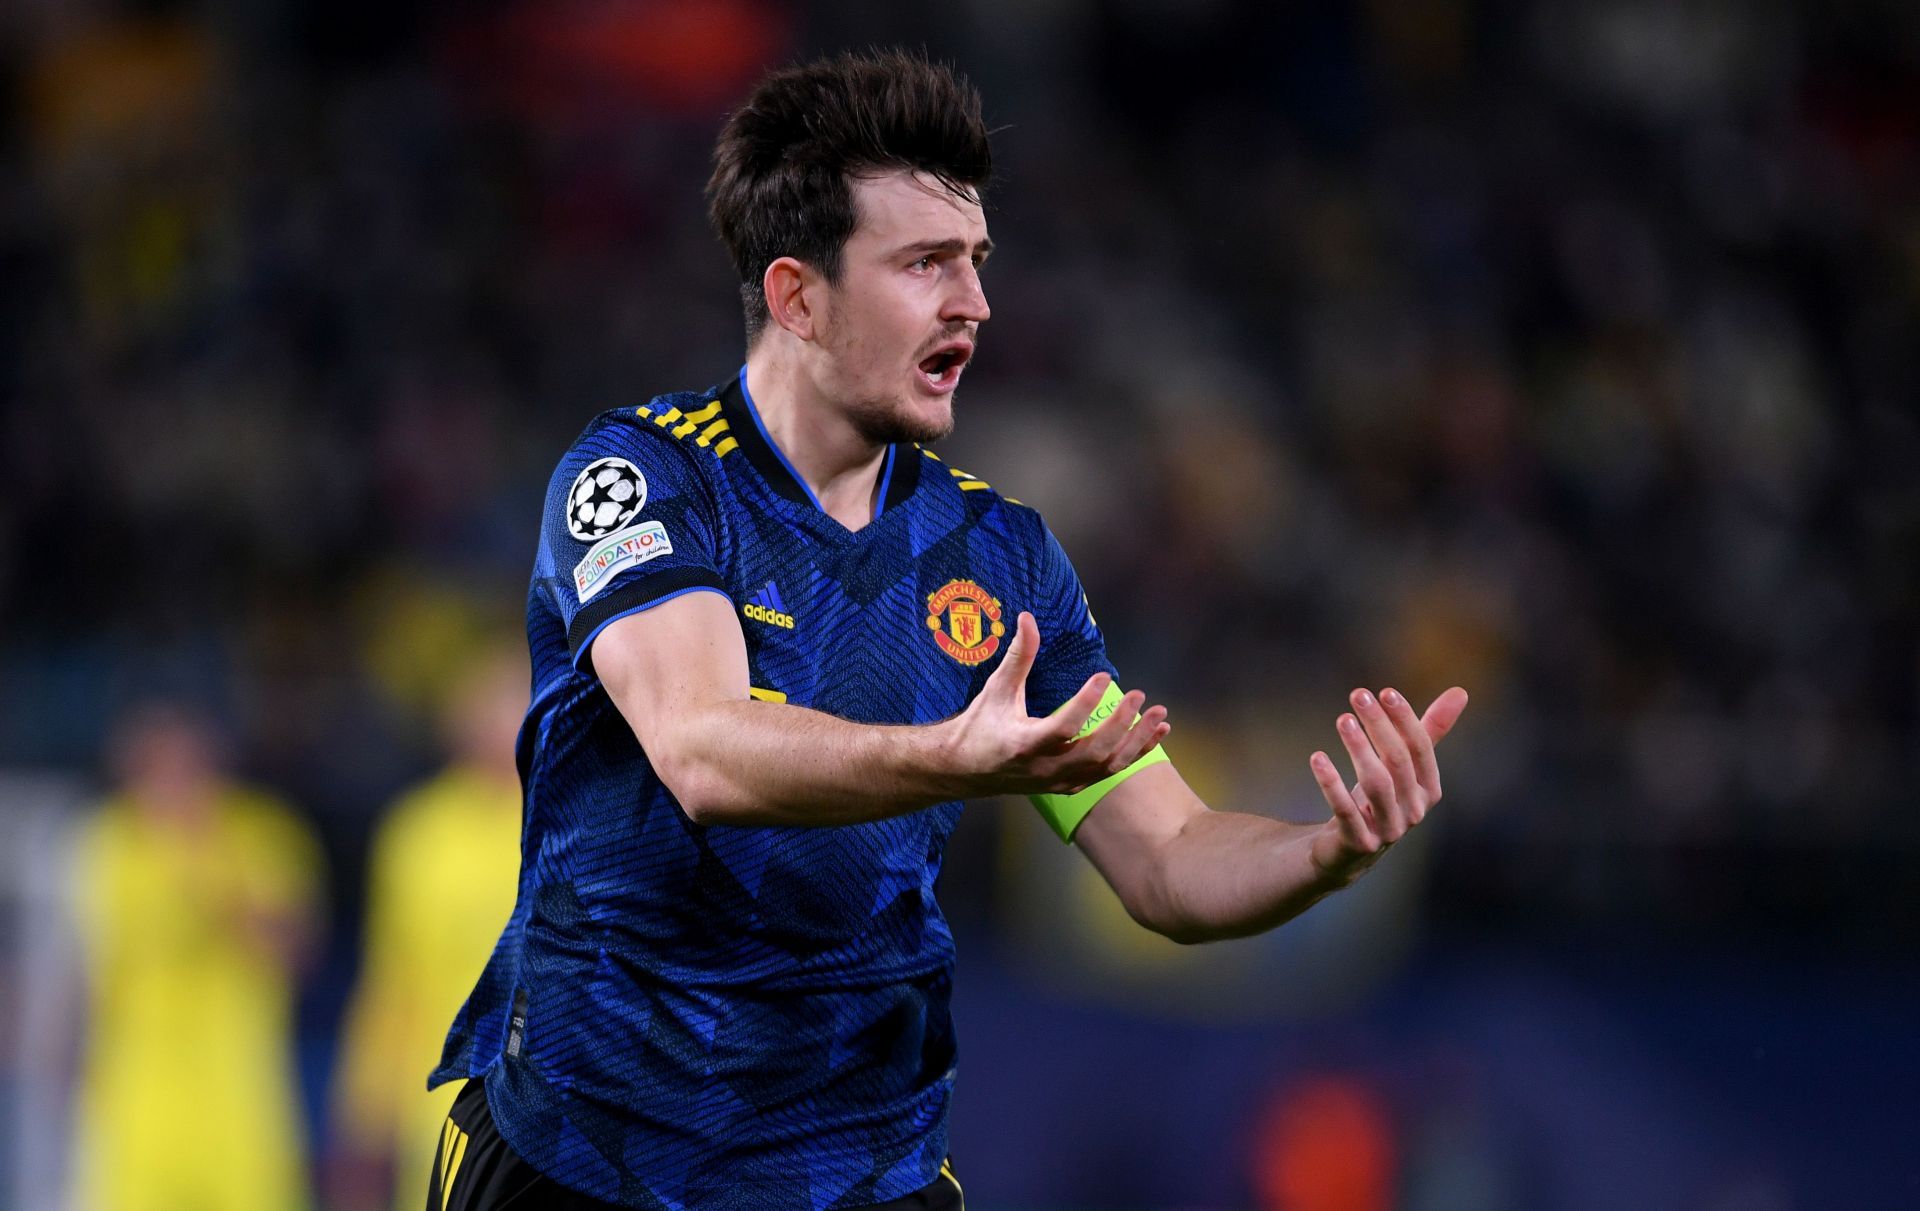 Manchester United captain Harry Maguire has had a torrid few weeks.